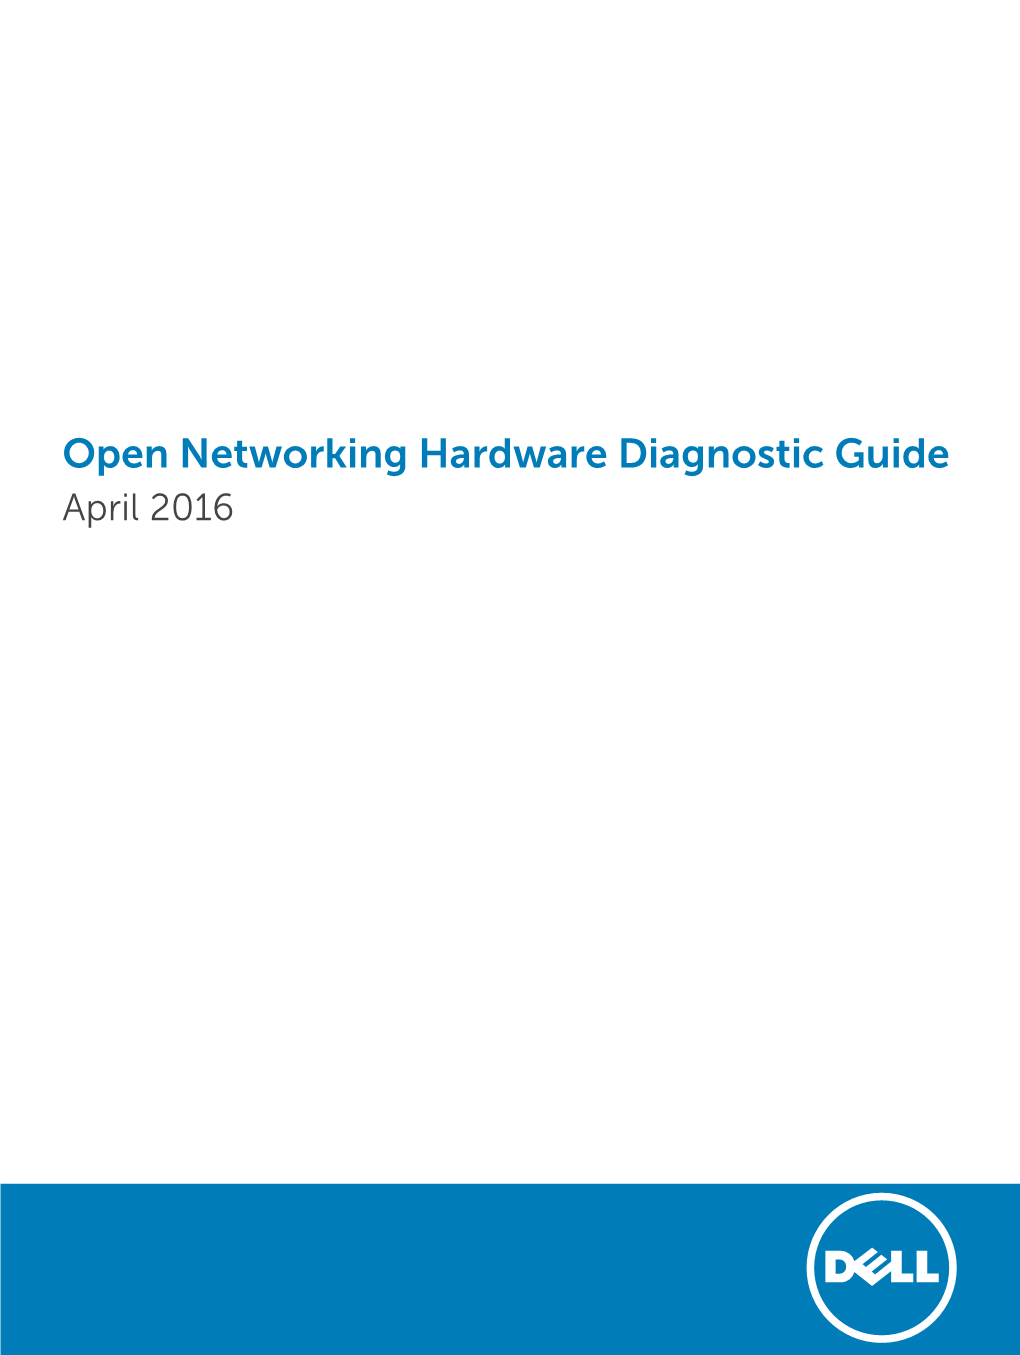 Open Networking Hardware Diagnostic Guide April 2016 Notes, Cautions, and Warnings